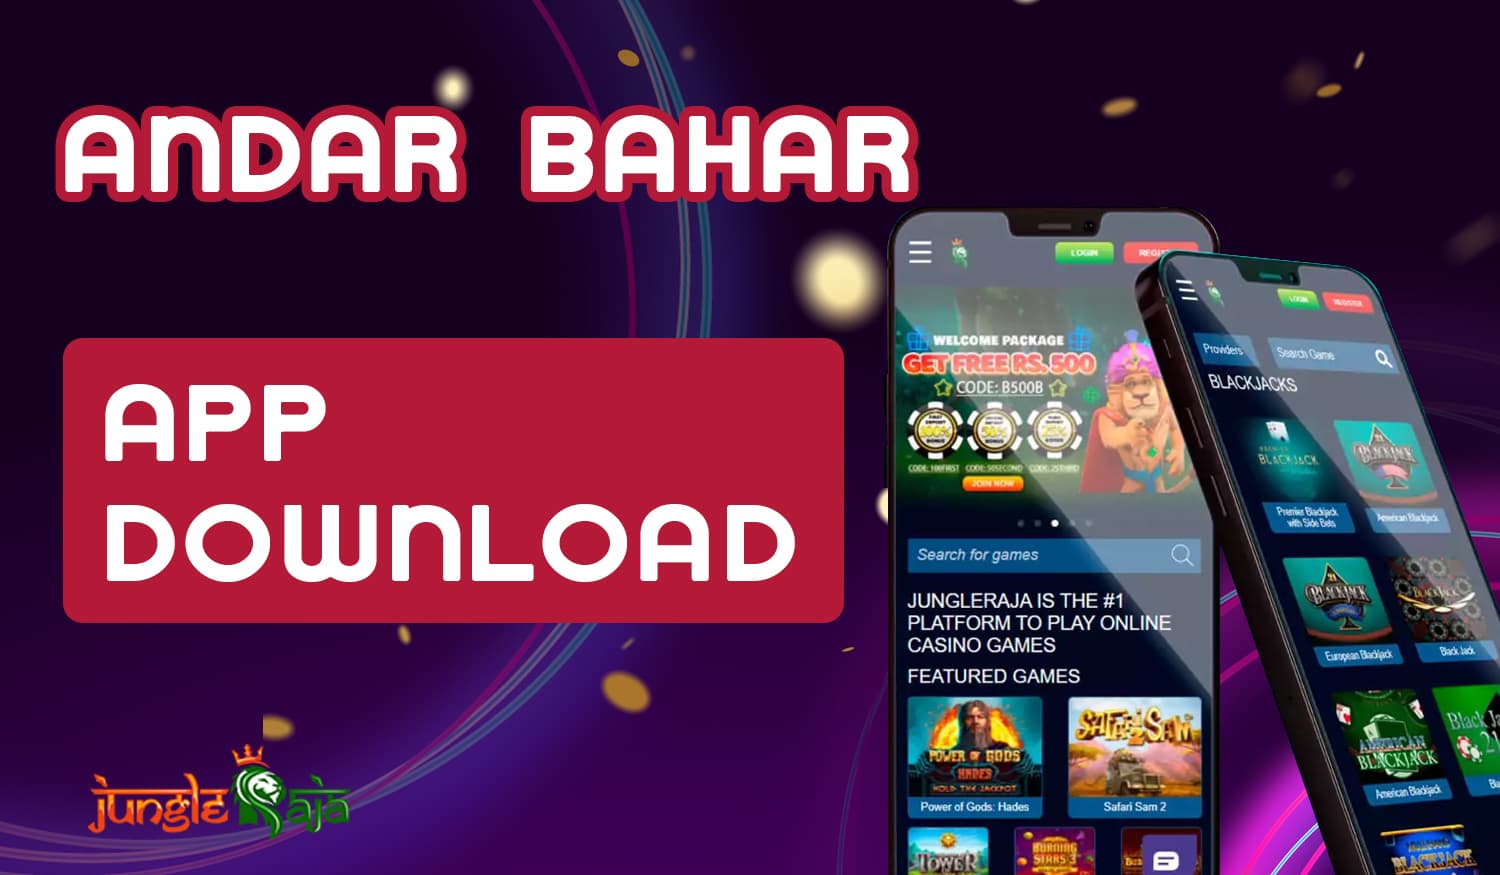 Why Indian users should try Andar Bahar game on JungleRaja mobile app